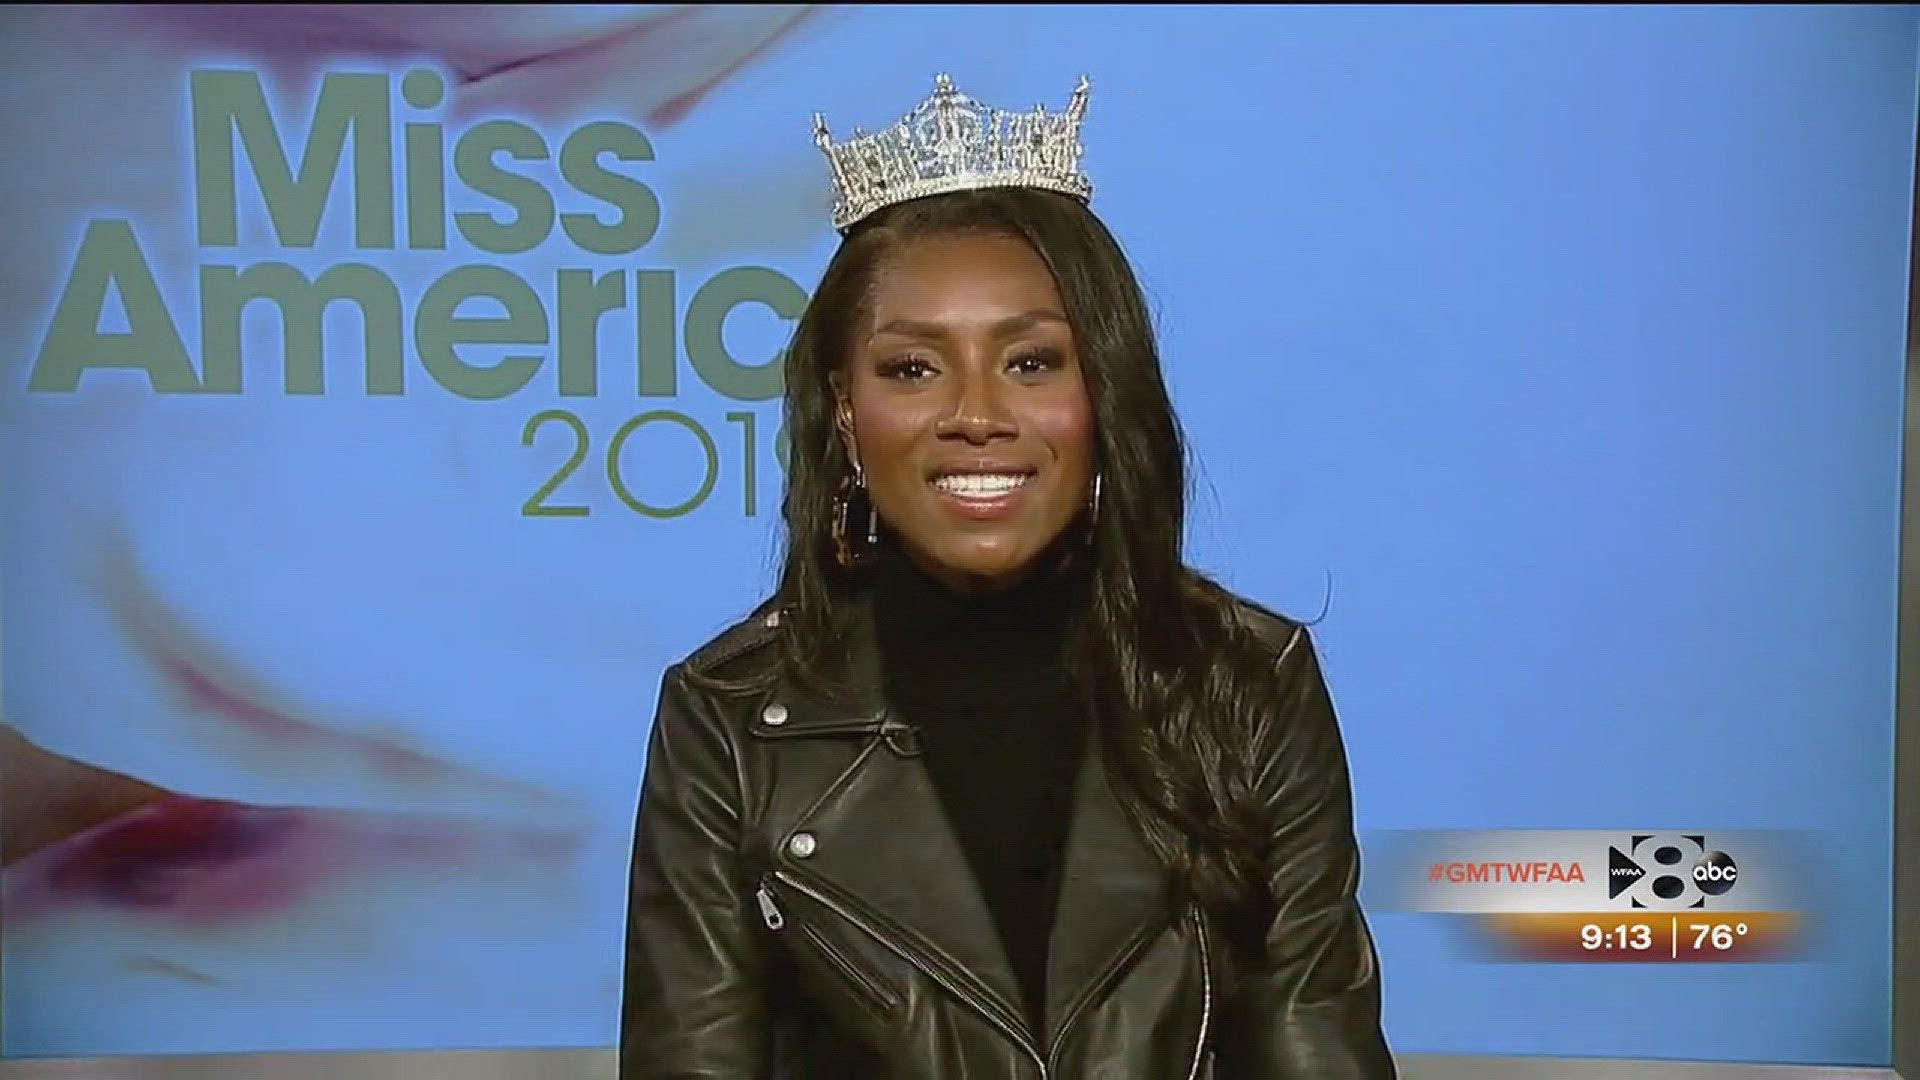 Go to www.missamerica.org for more information.